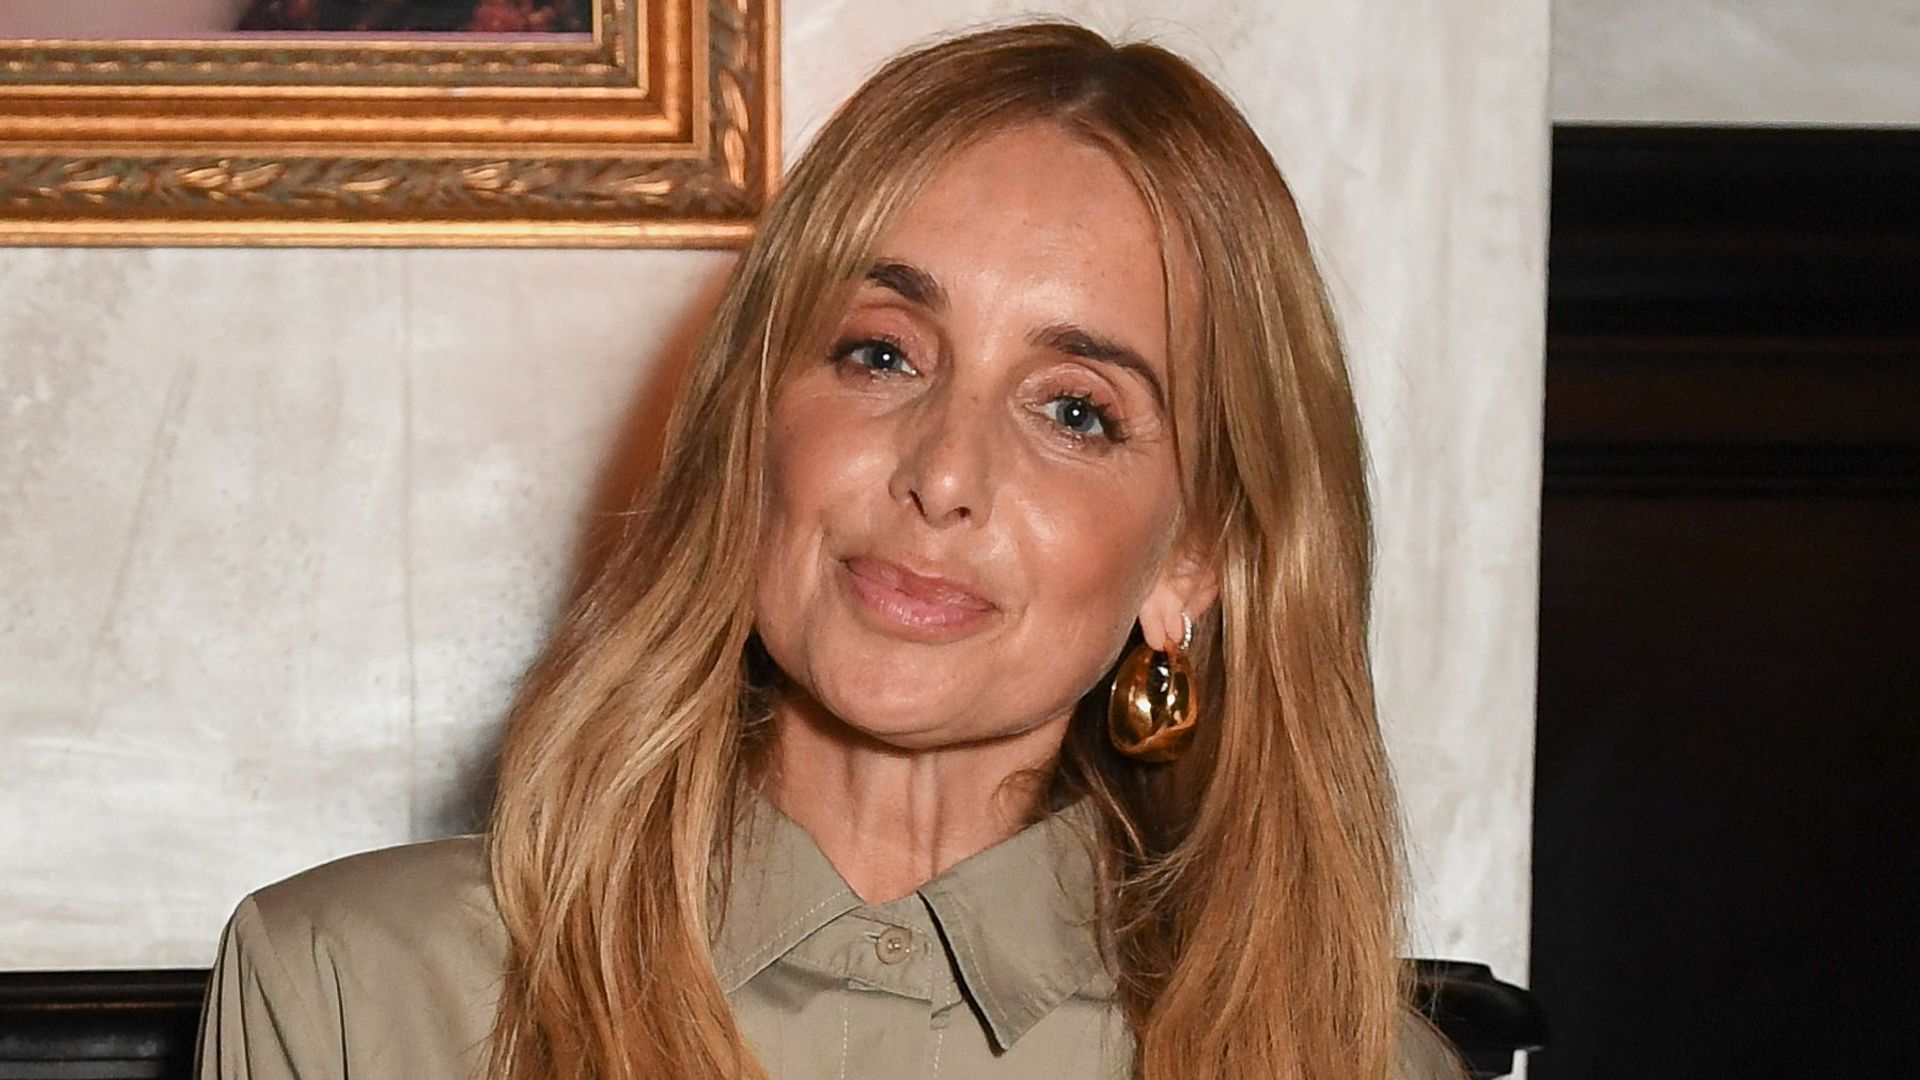 Louise Redknapp is a vision in striking fitted dress as she sends touching message